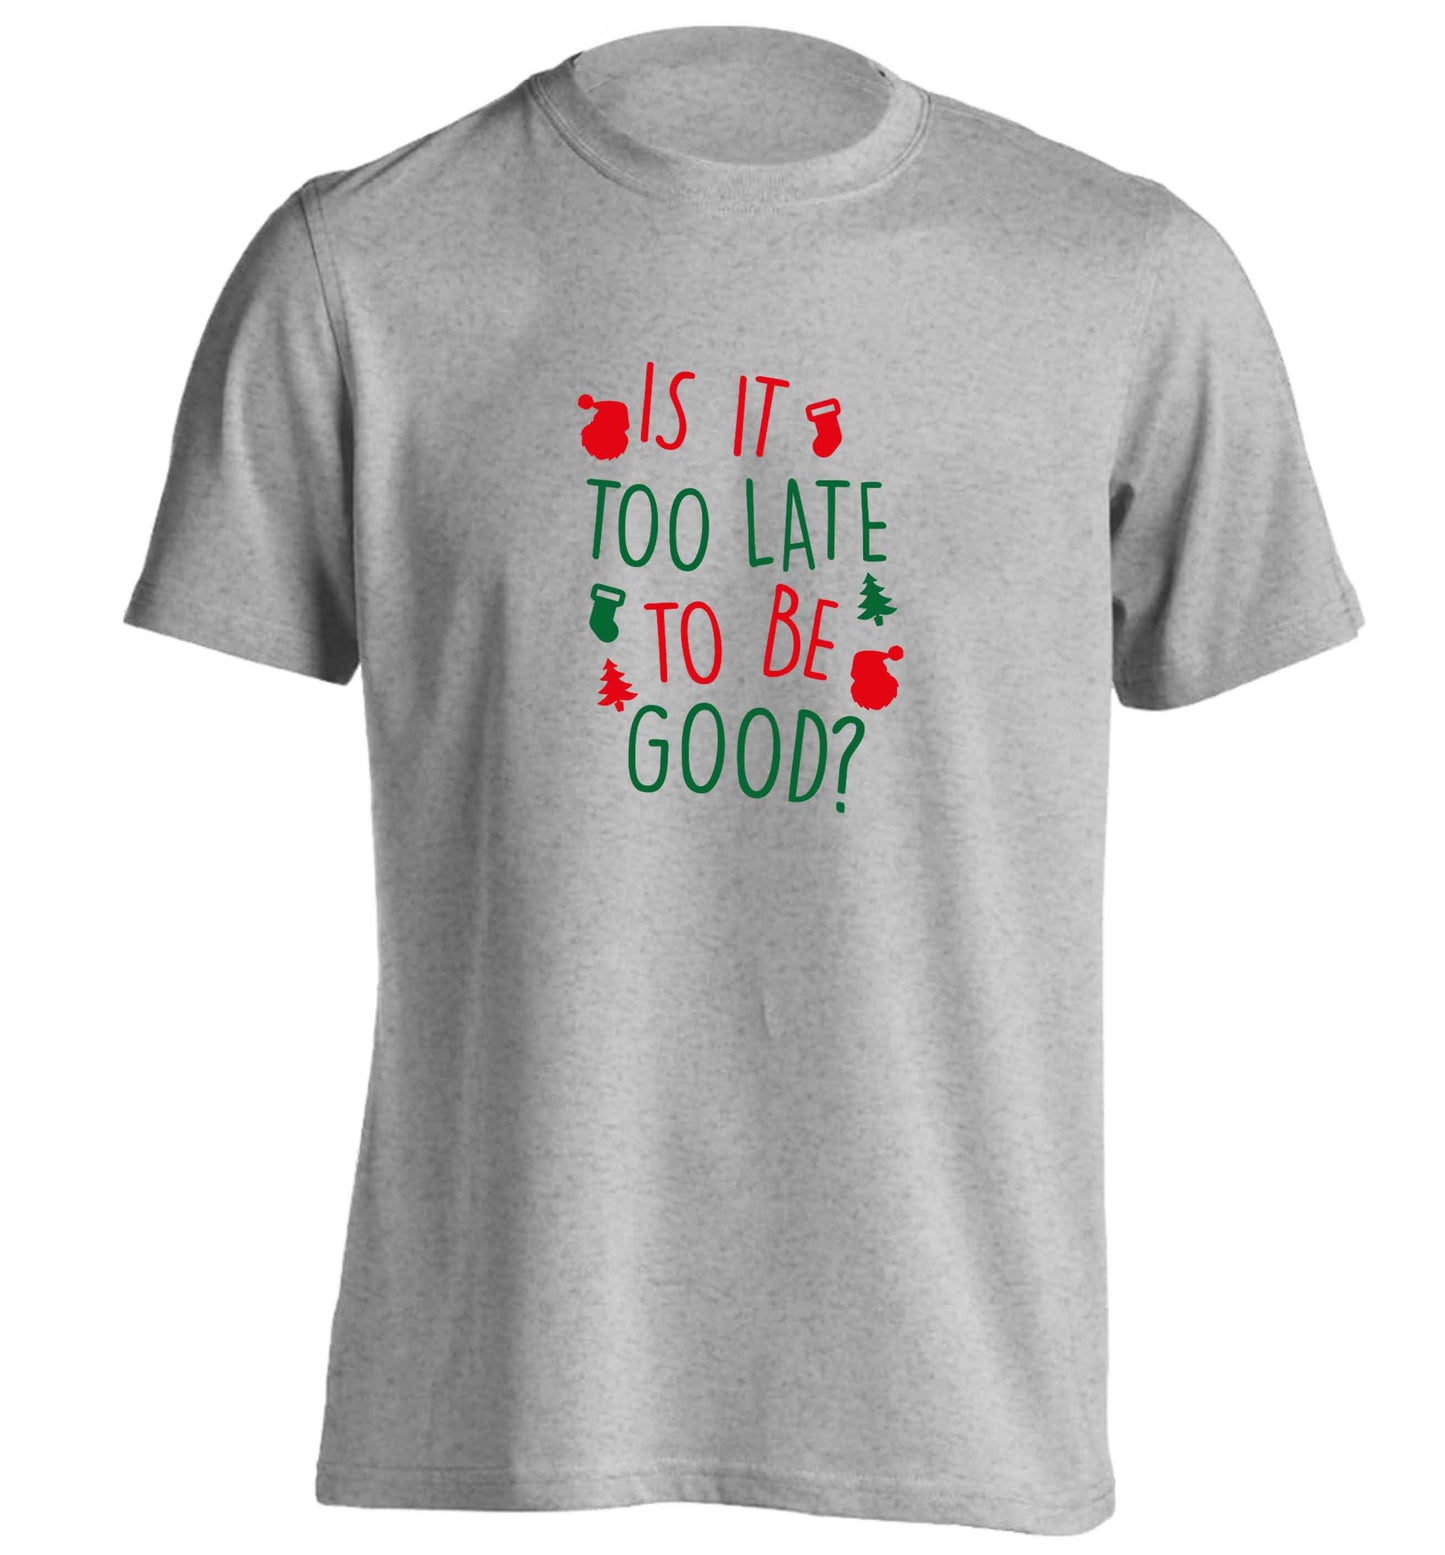 Too Late to be Good adults unisex grey Tshirt 2XL